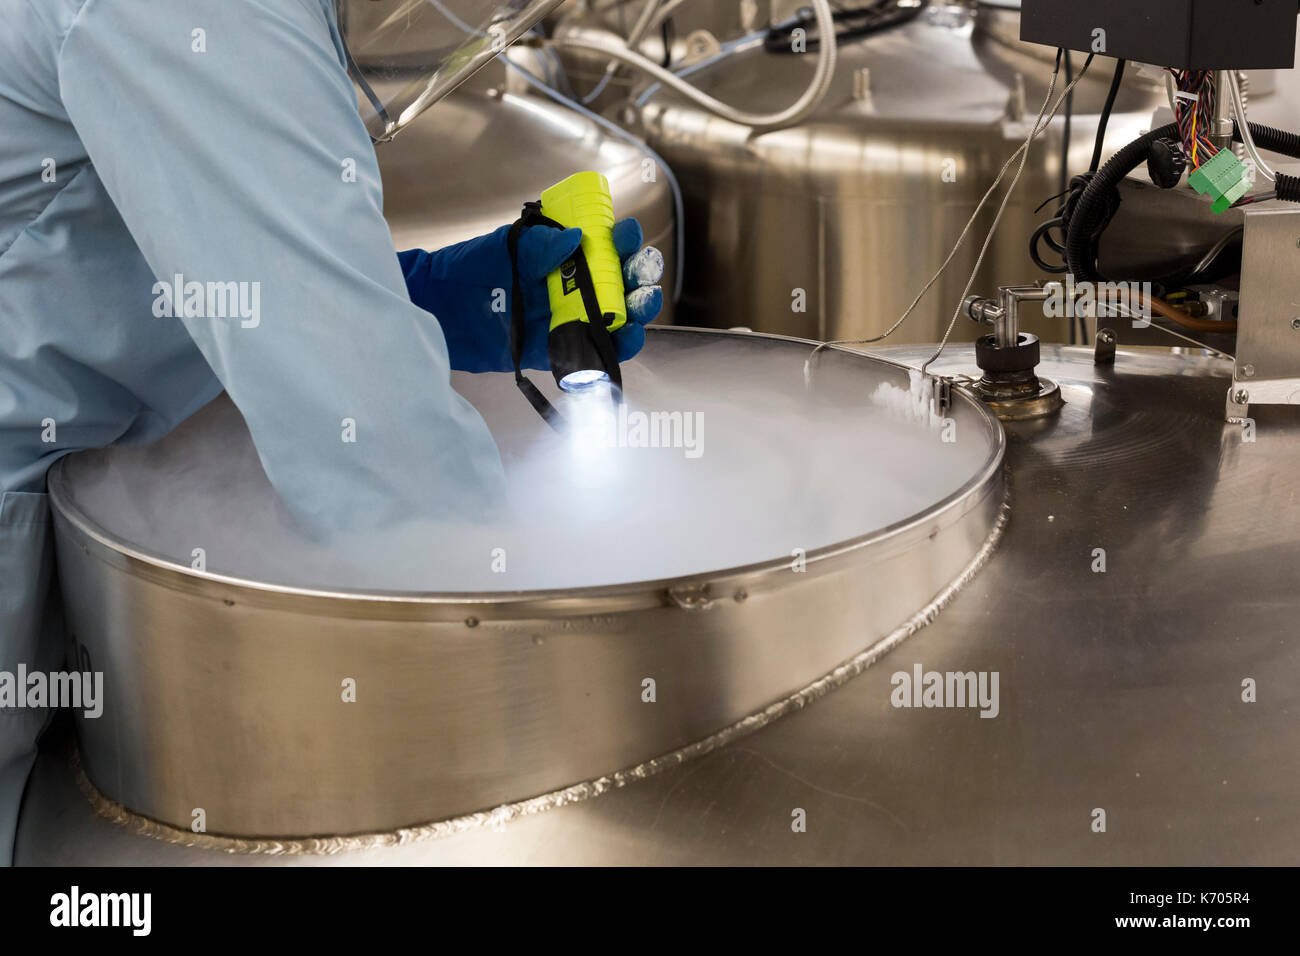 Fort Collins, Colorado - Amy Gurza, a biological science technician, inspects the contents of a tank of liquid nitrogen that stores seeds and other ge Stock Photo